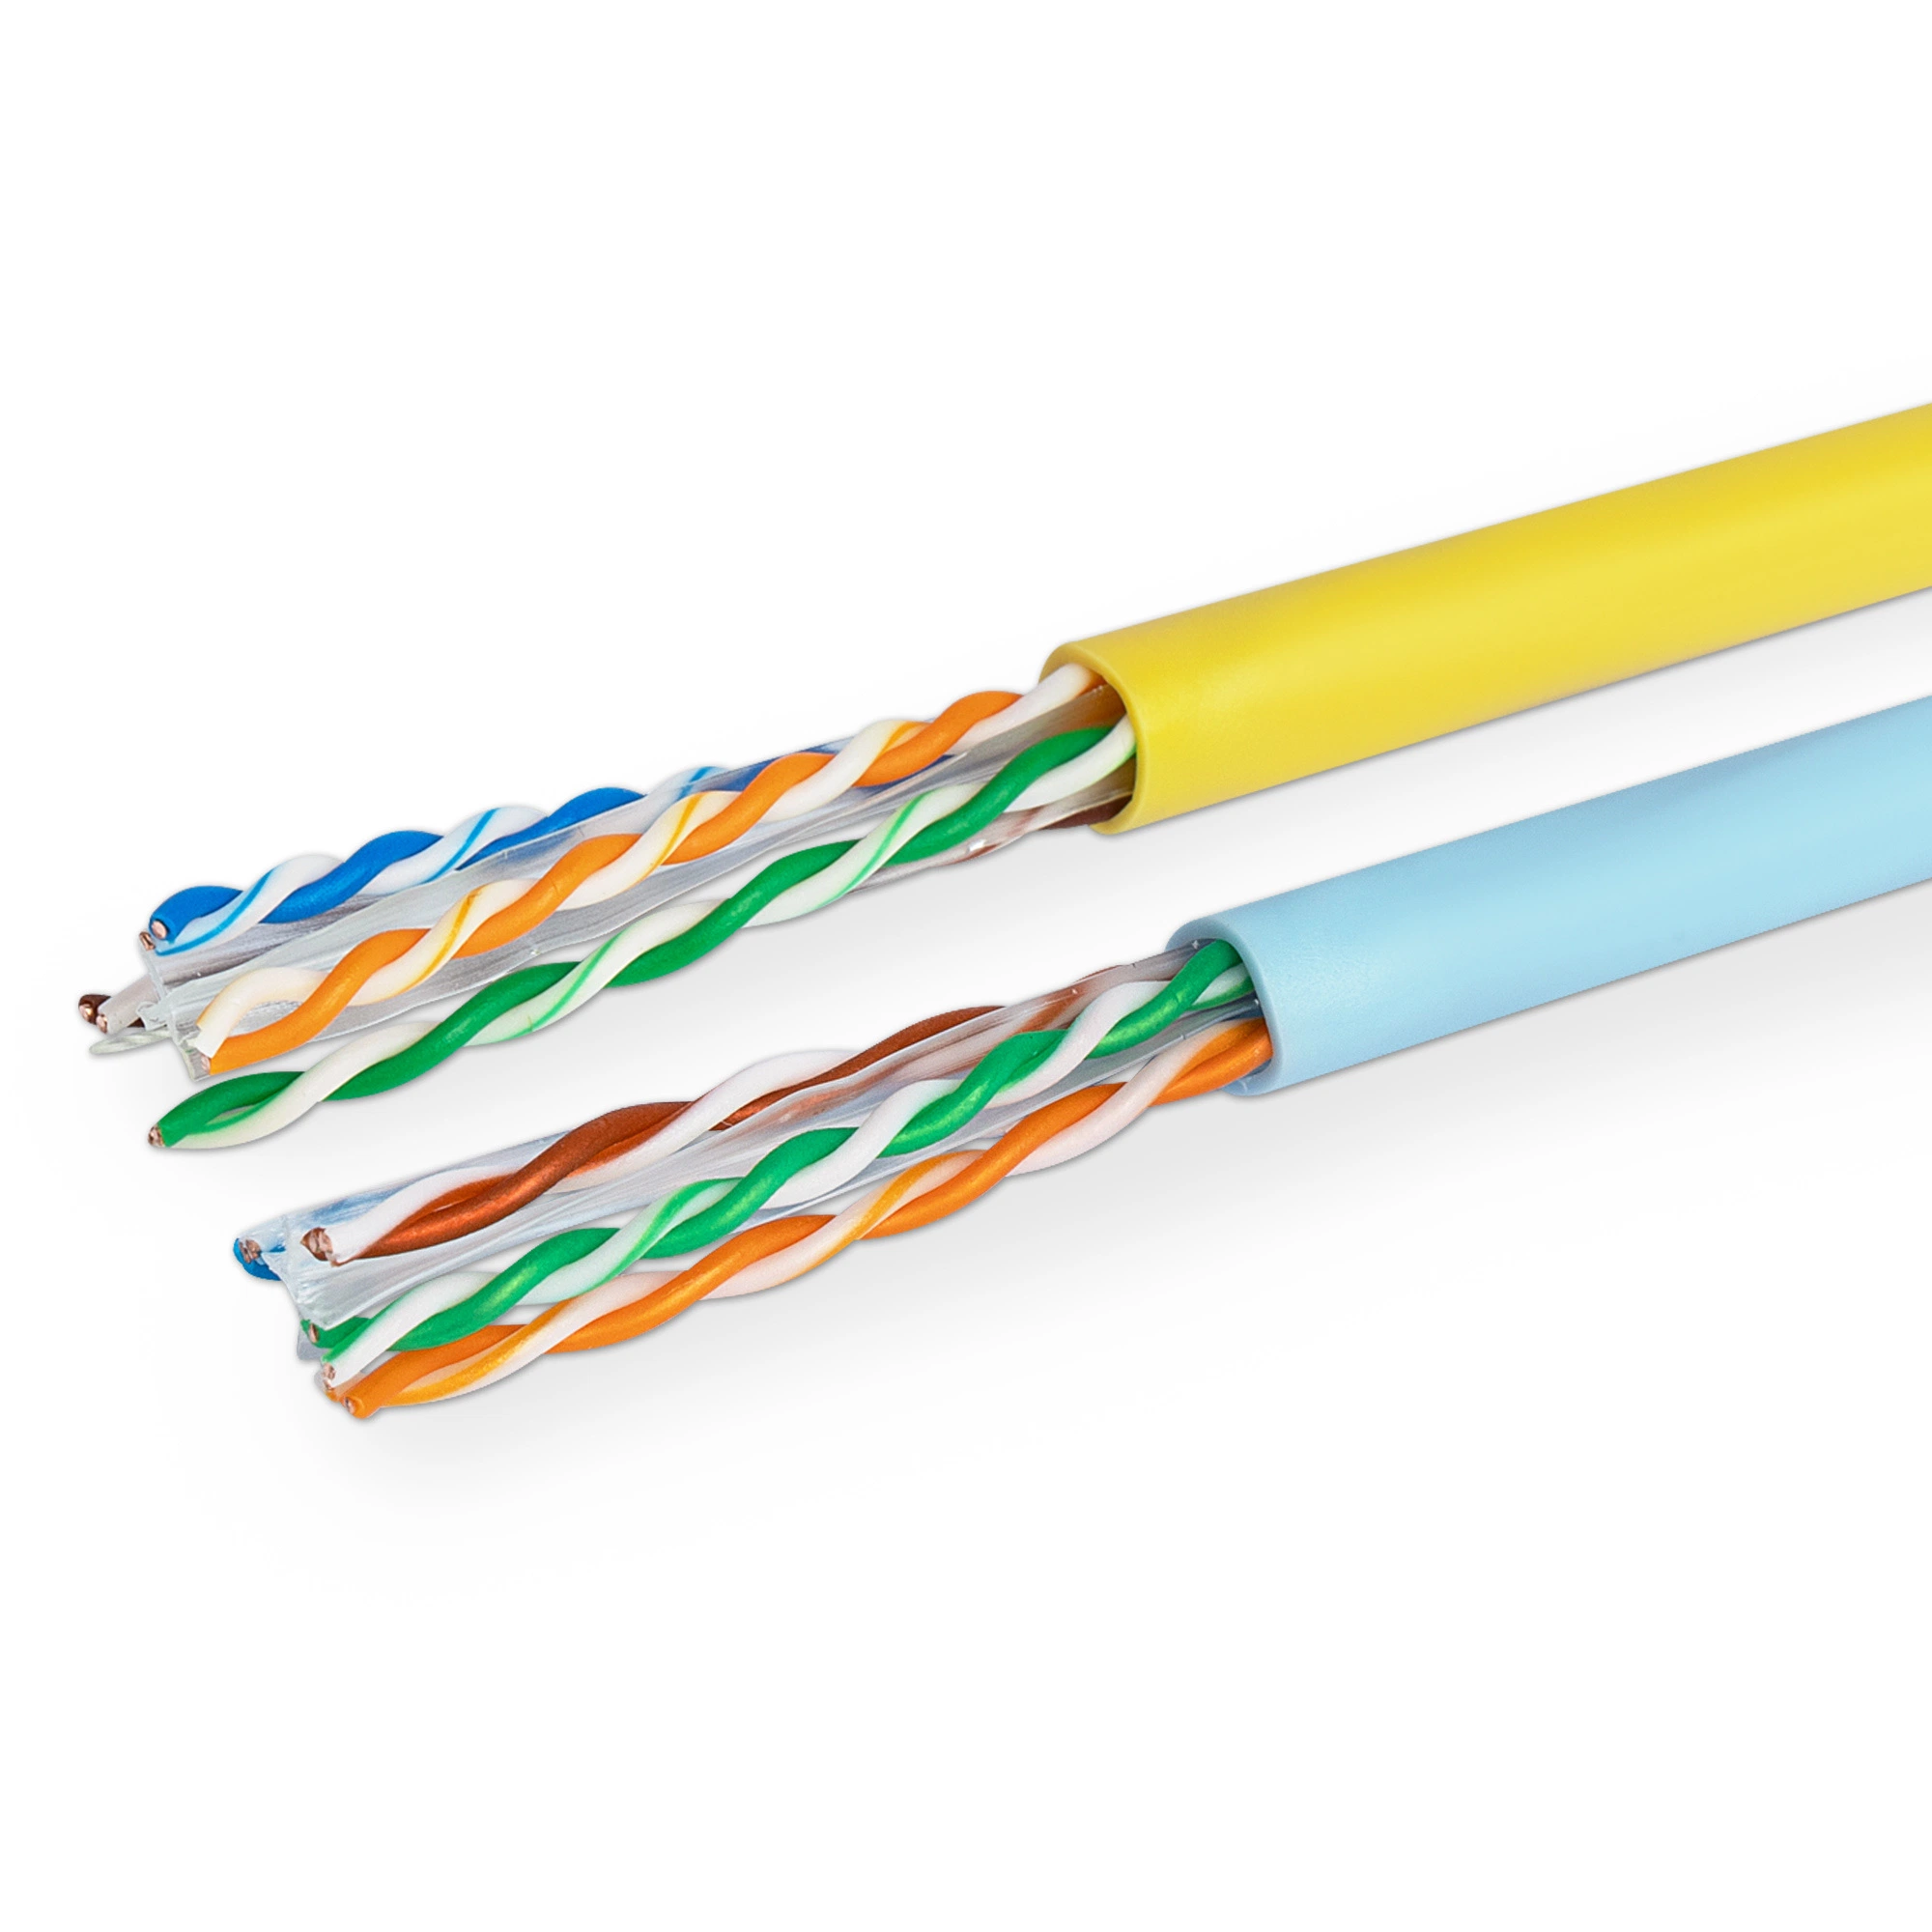 Bare Copper Cat5/Cat5e/CAT6 Networking LAN Ethernet Network Cable